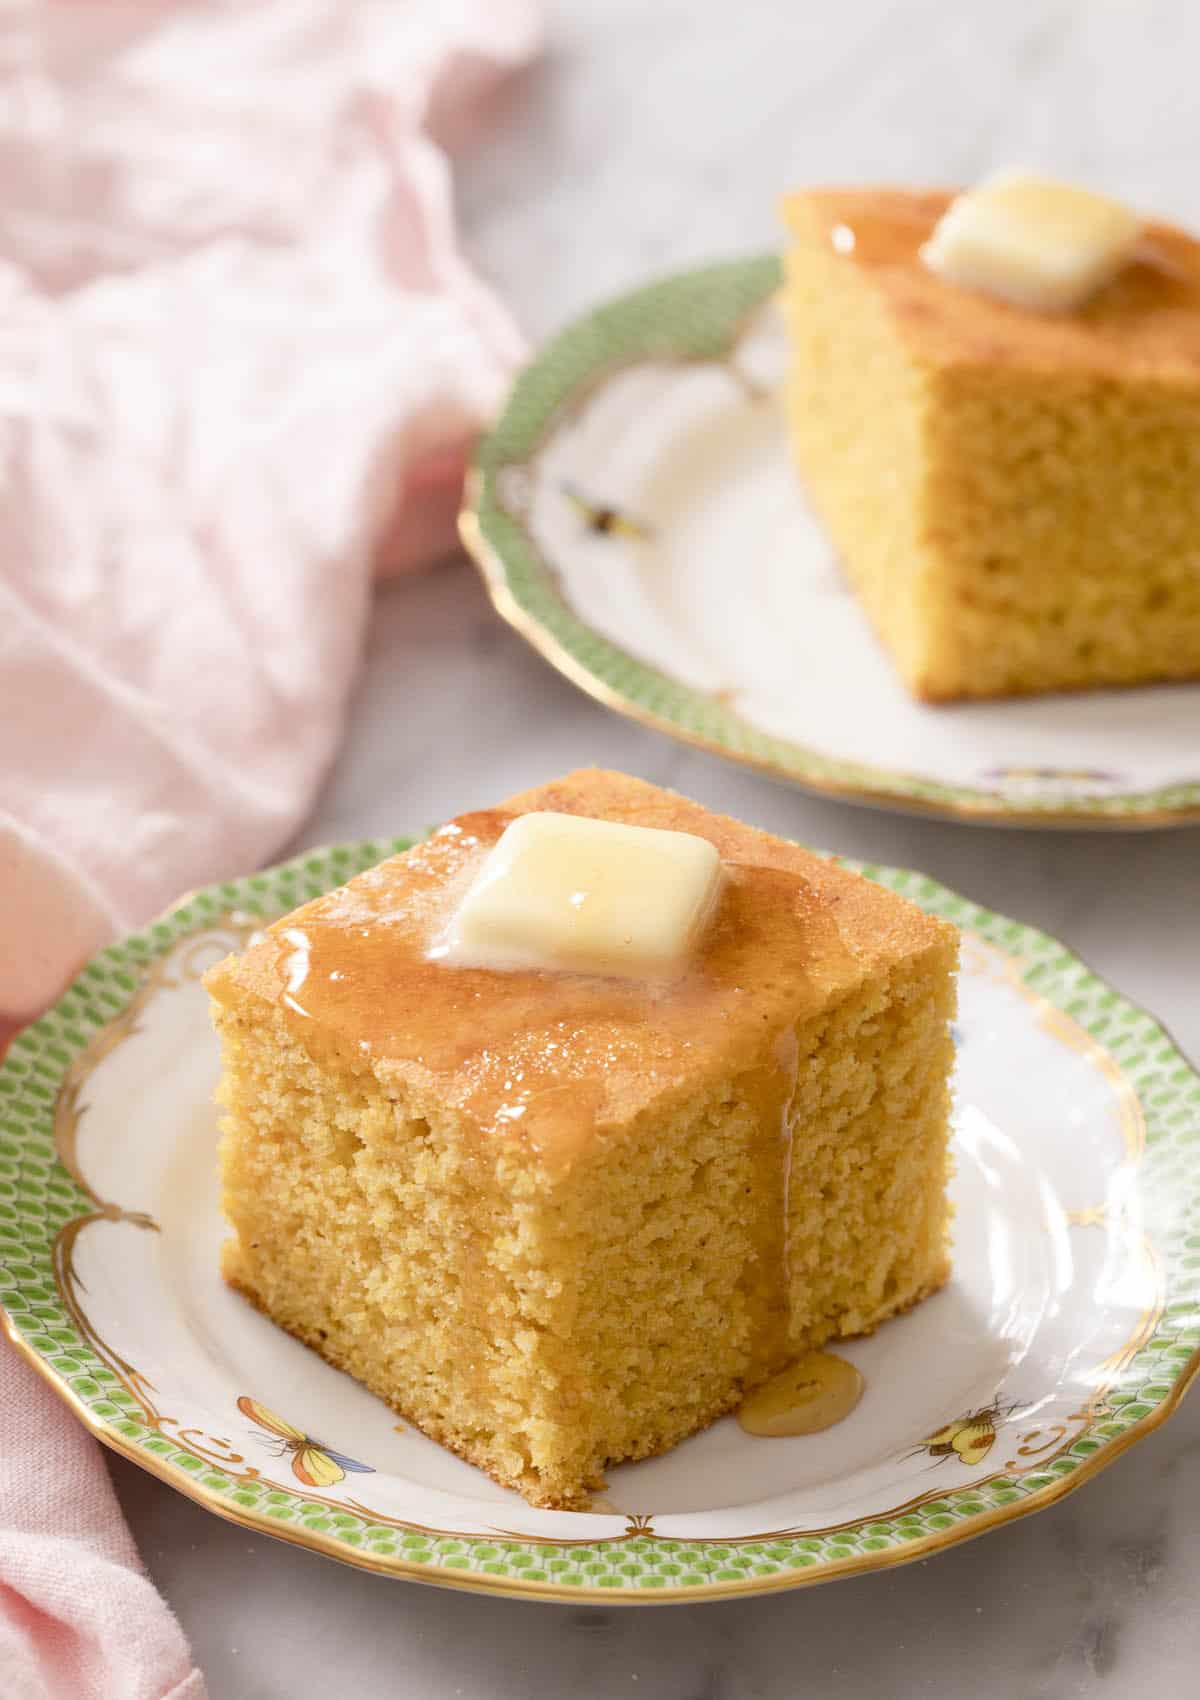 Pieces of cornbread topped with butter and honey on porcelain plates.